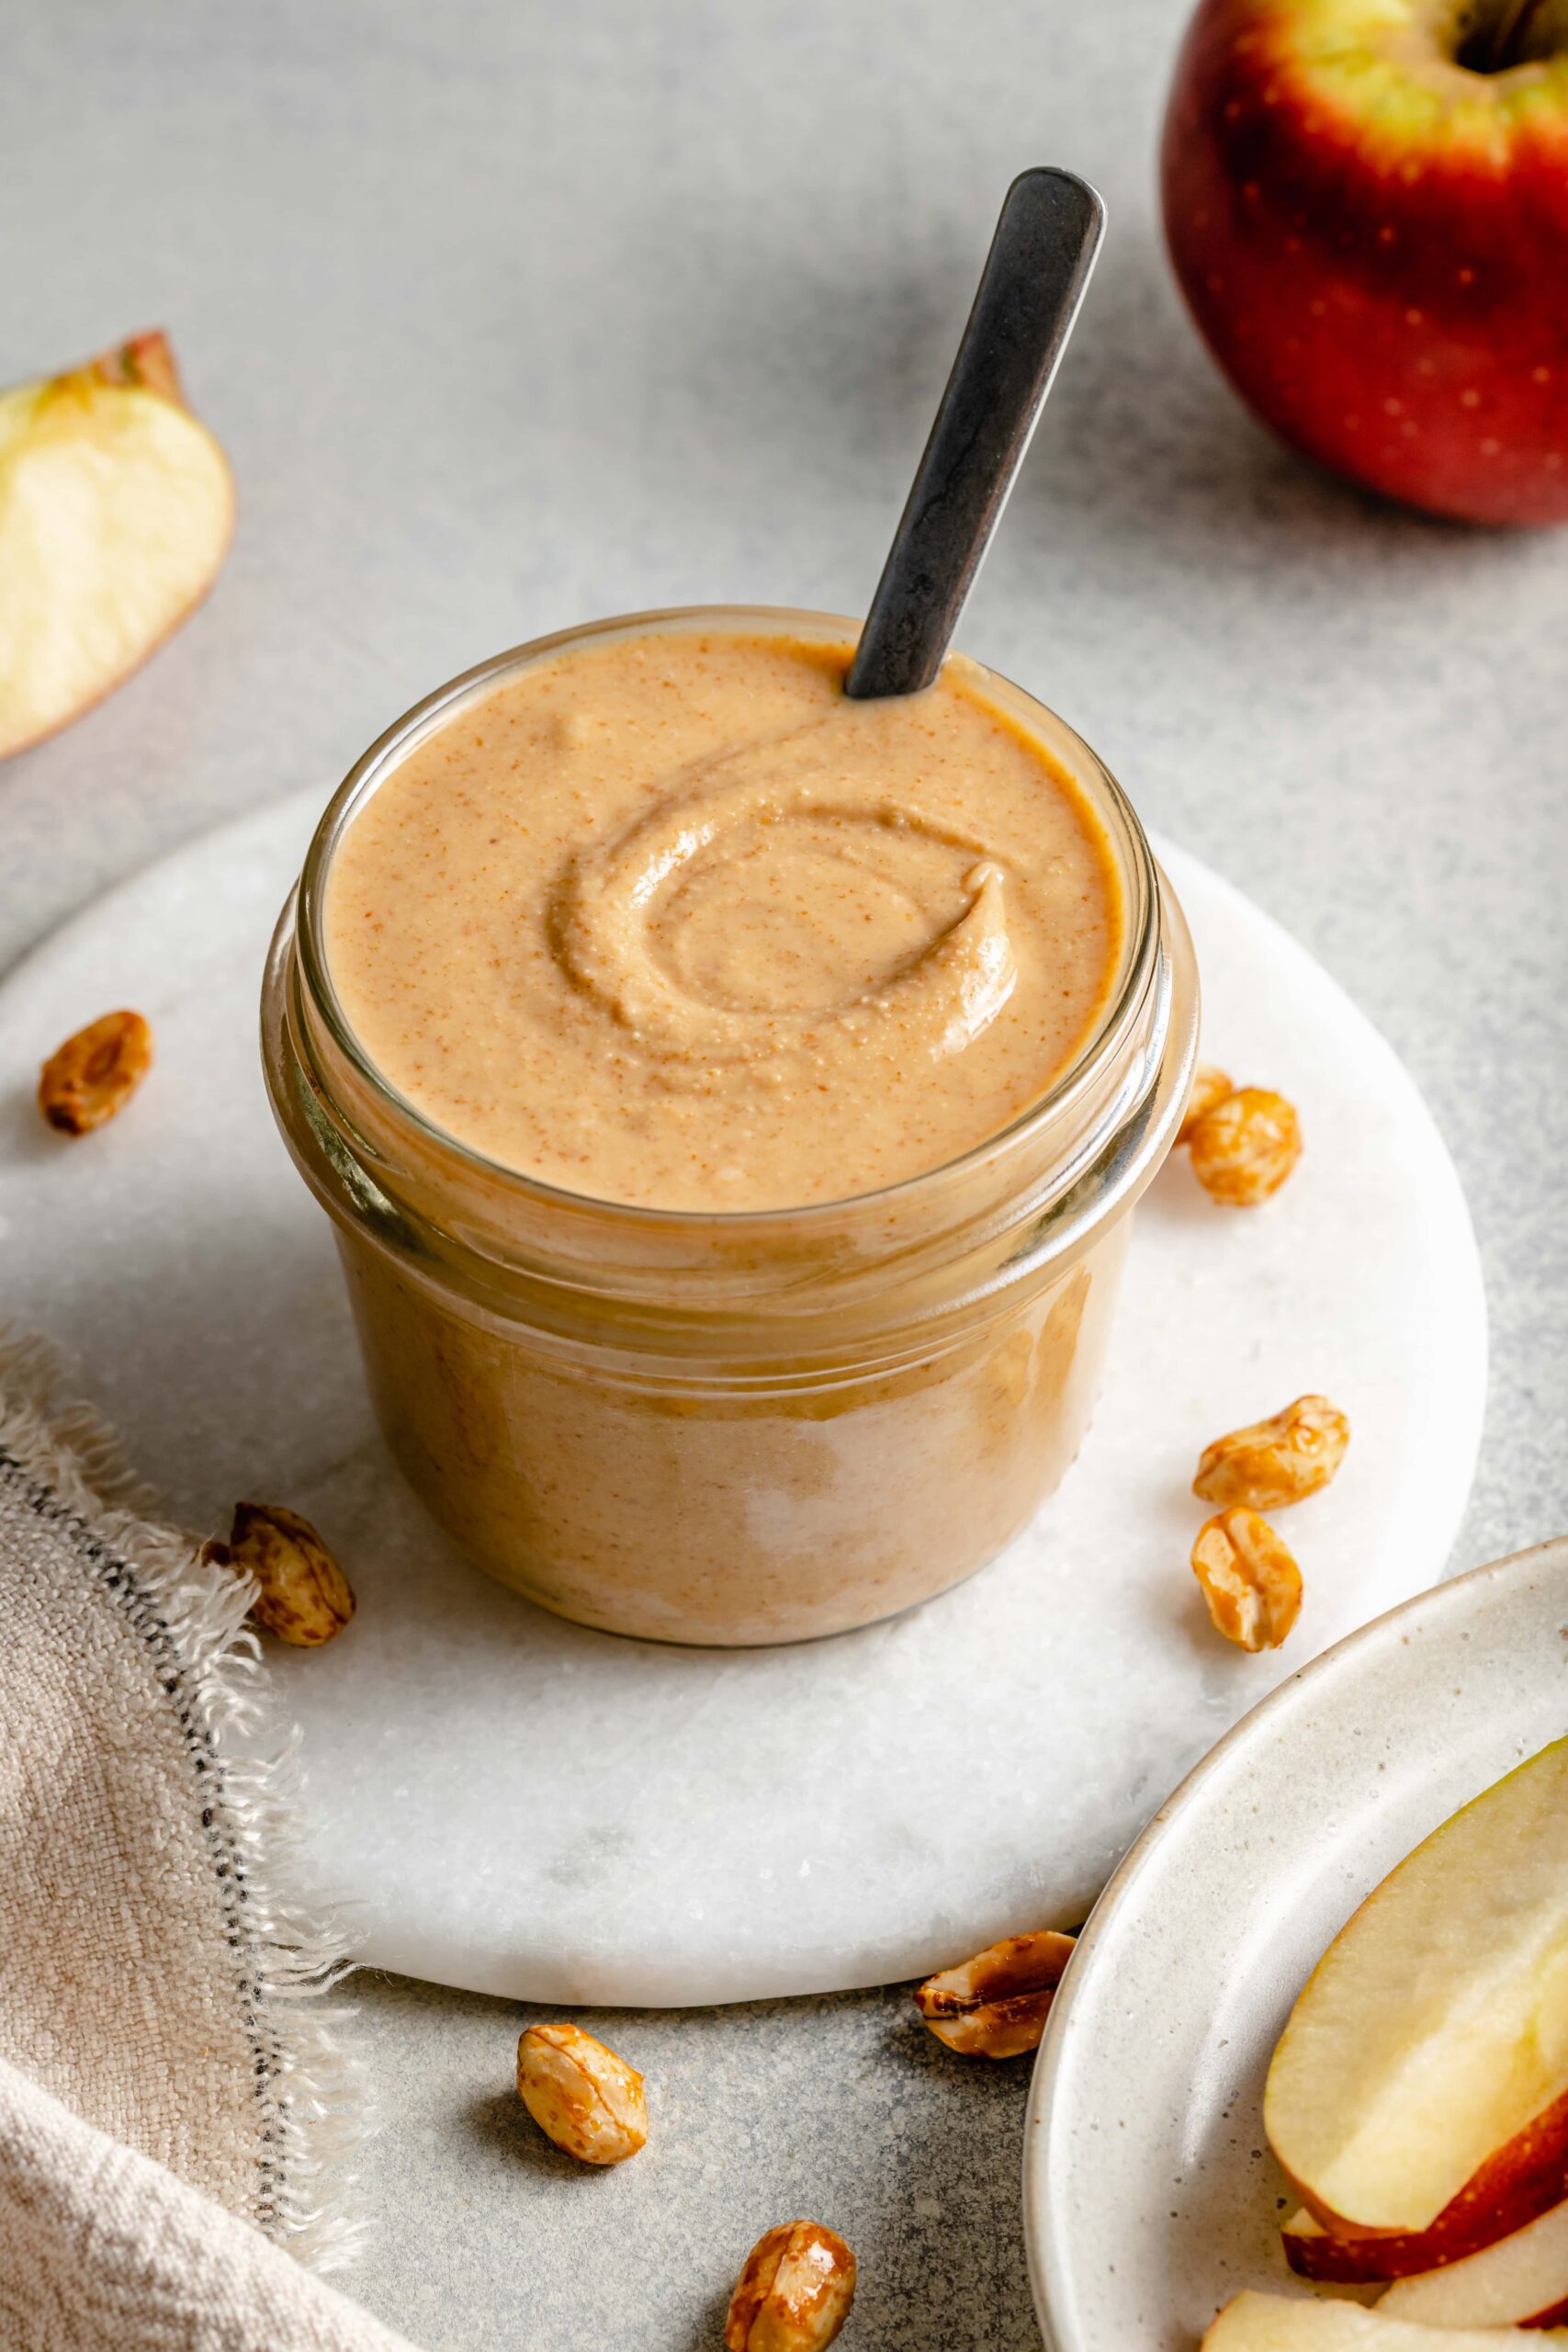 Homemade Peanut Butter - All the Healthy Things